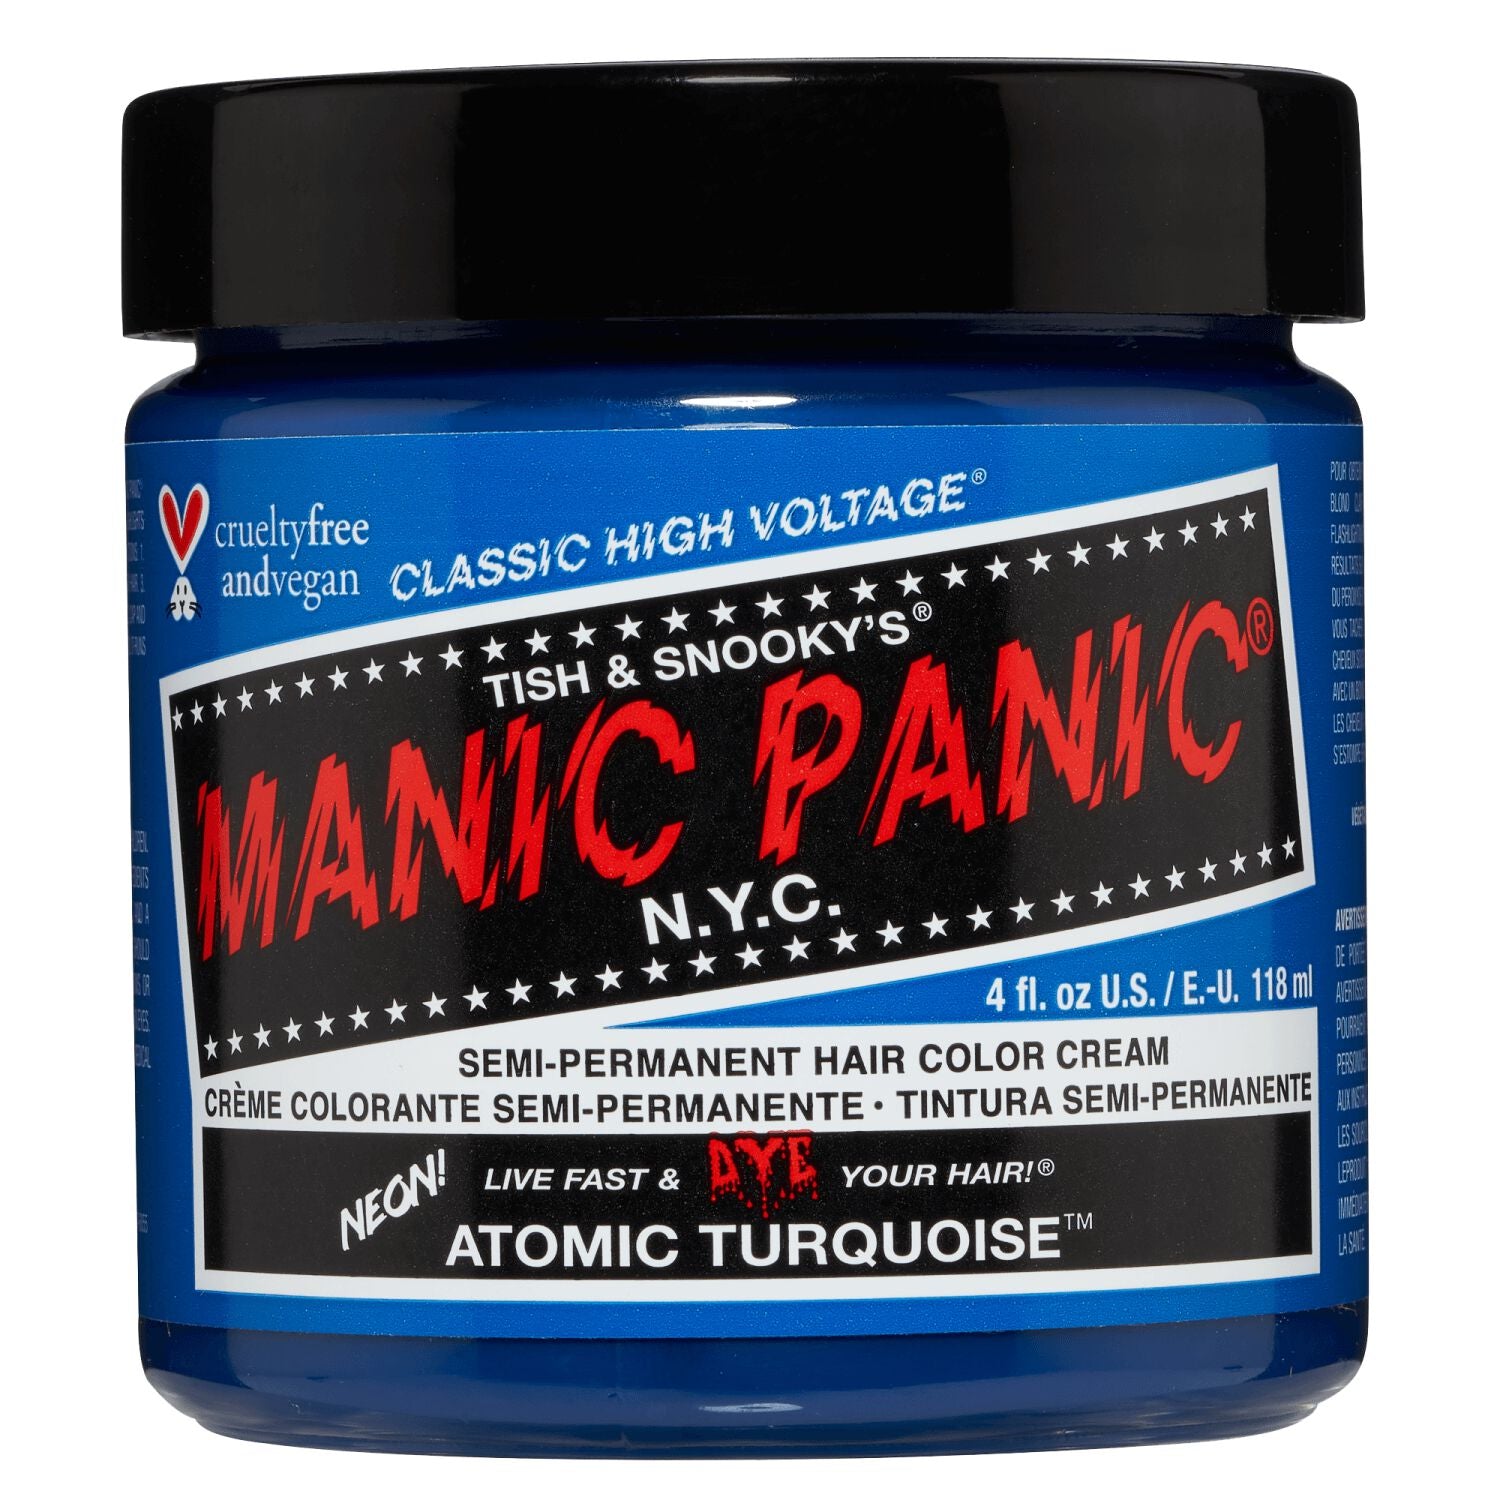 Manic Panic® Classic High Voltage Hair Color - Atomic Turquoise